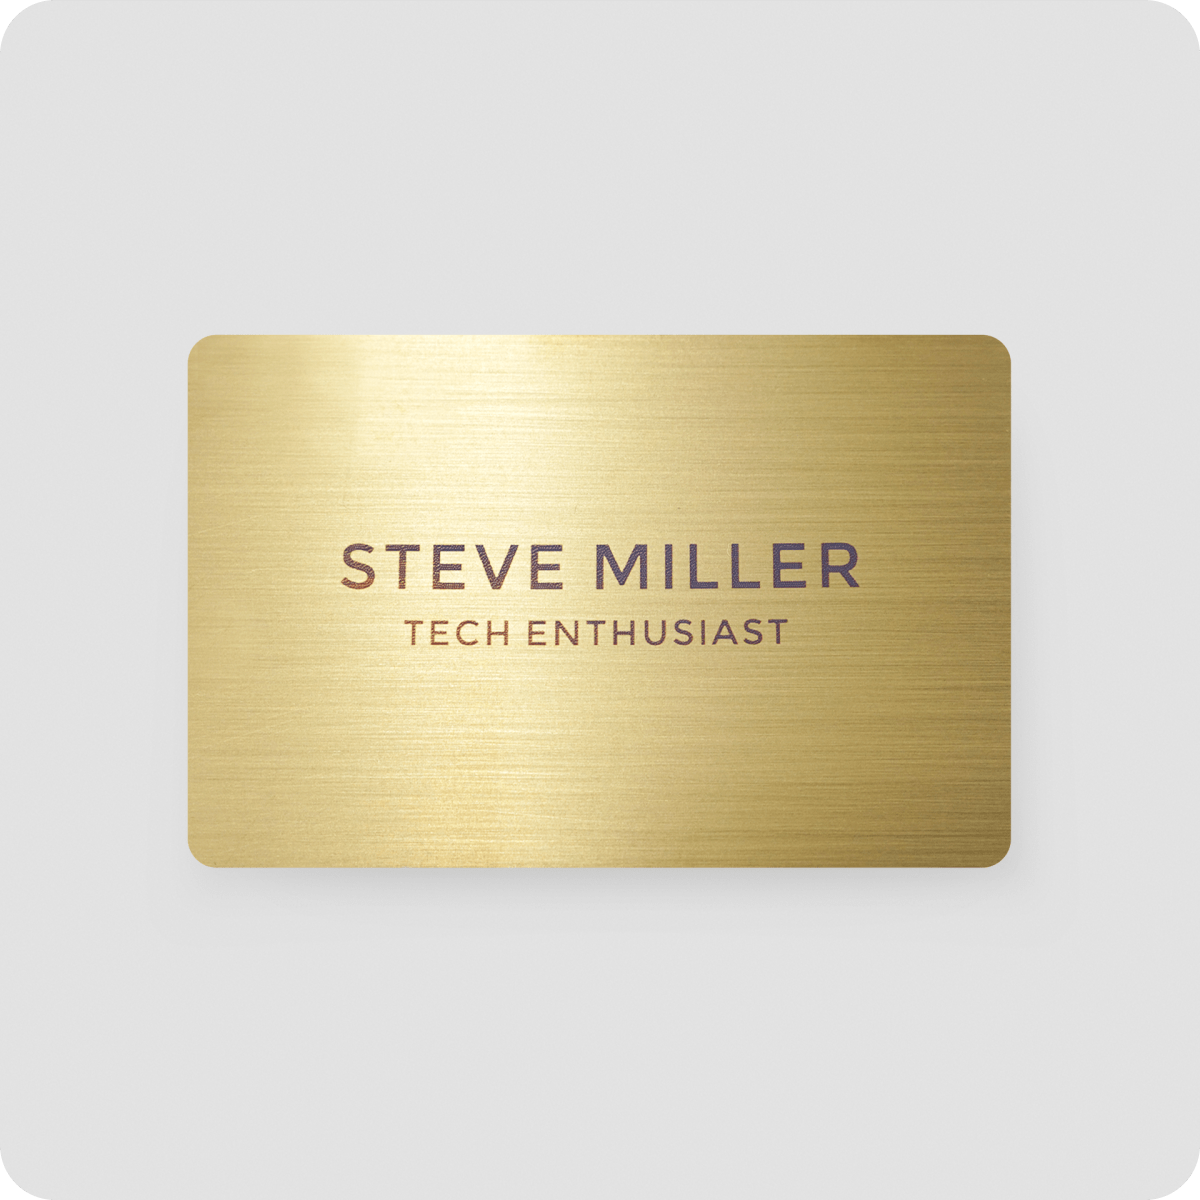 One Good Card | Smart Digital Name Card (Obsidian) - Personalised Near Field Communication (NFC) Business Cards designs.